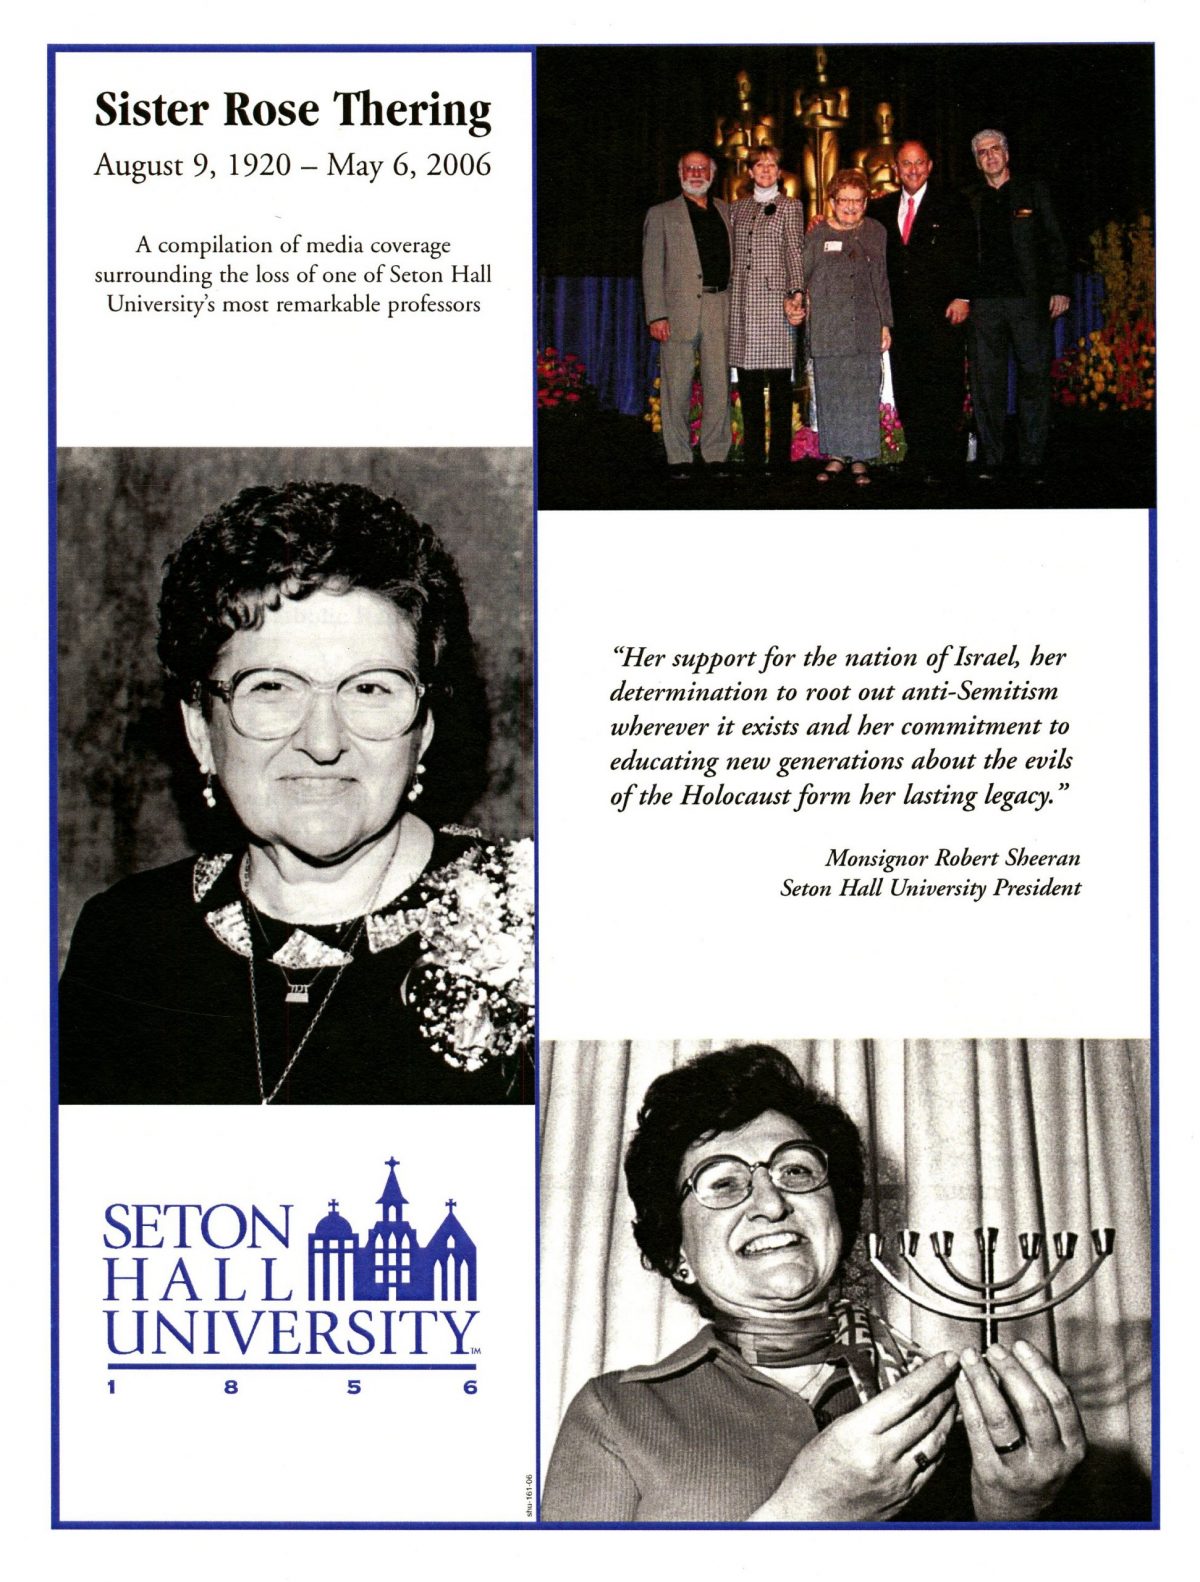 A graphic consisting of images and text honoring and remembering Sister Rose Thering.